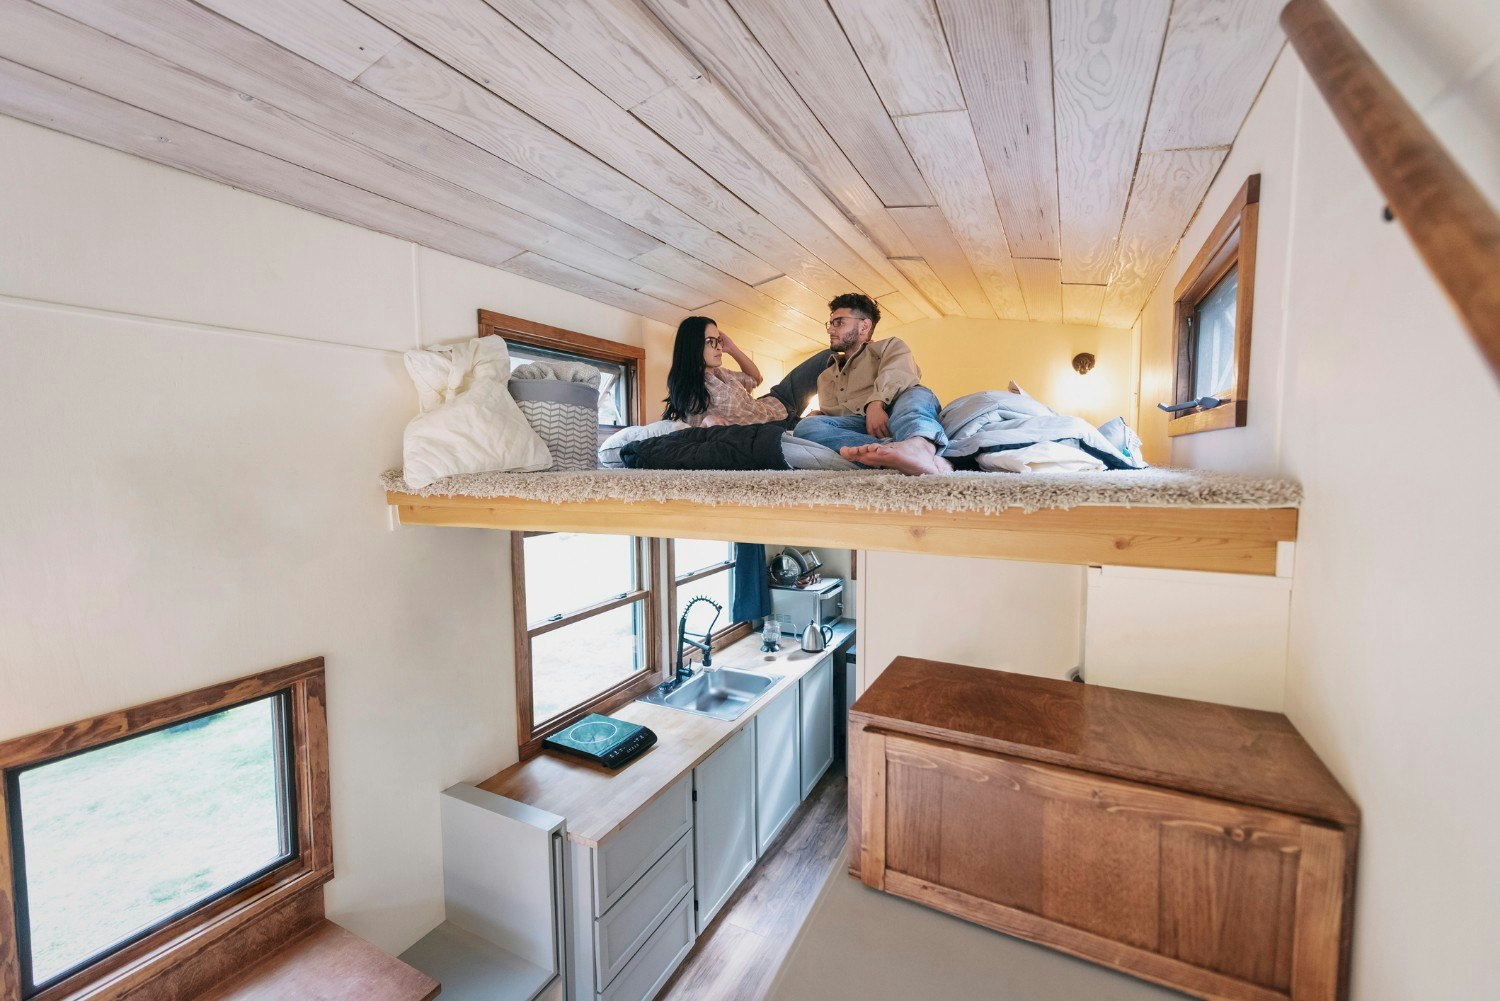 A young couple in the bedroom loft of tiny house 